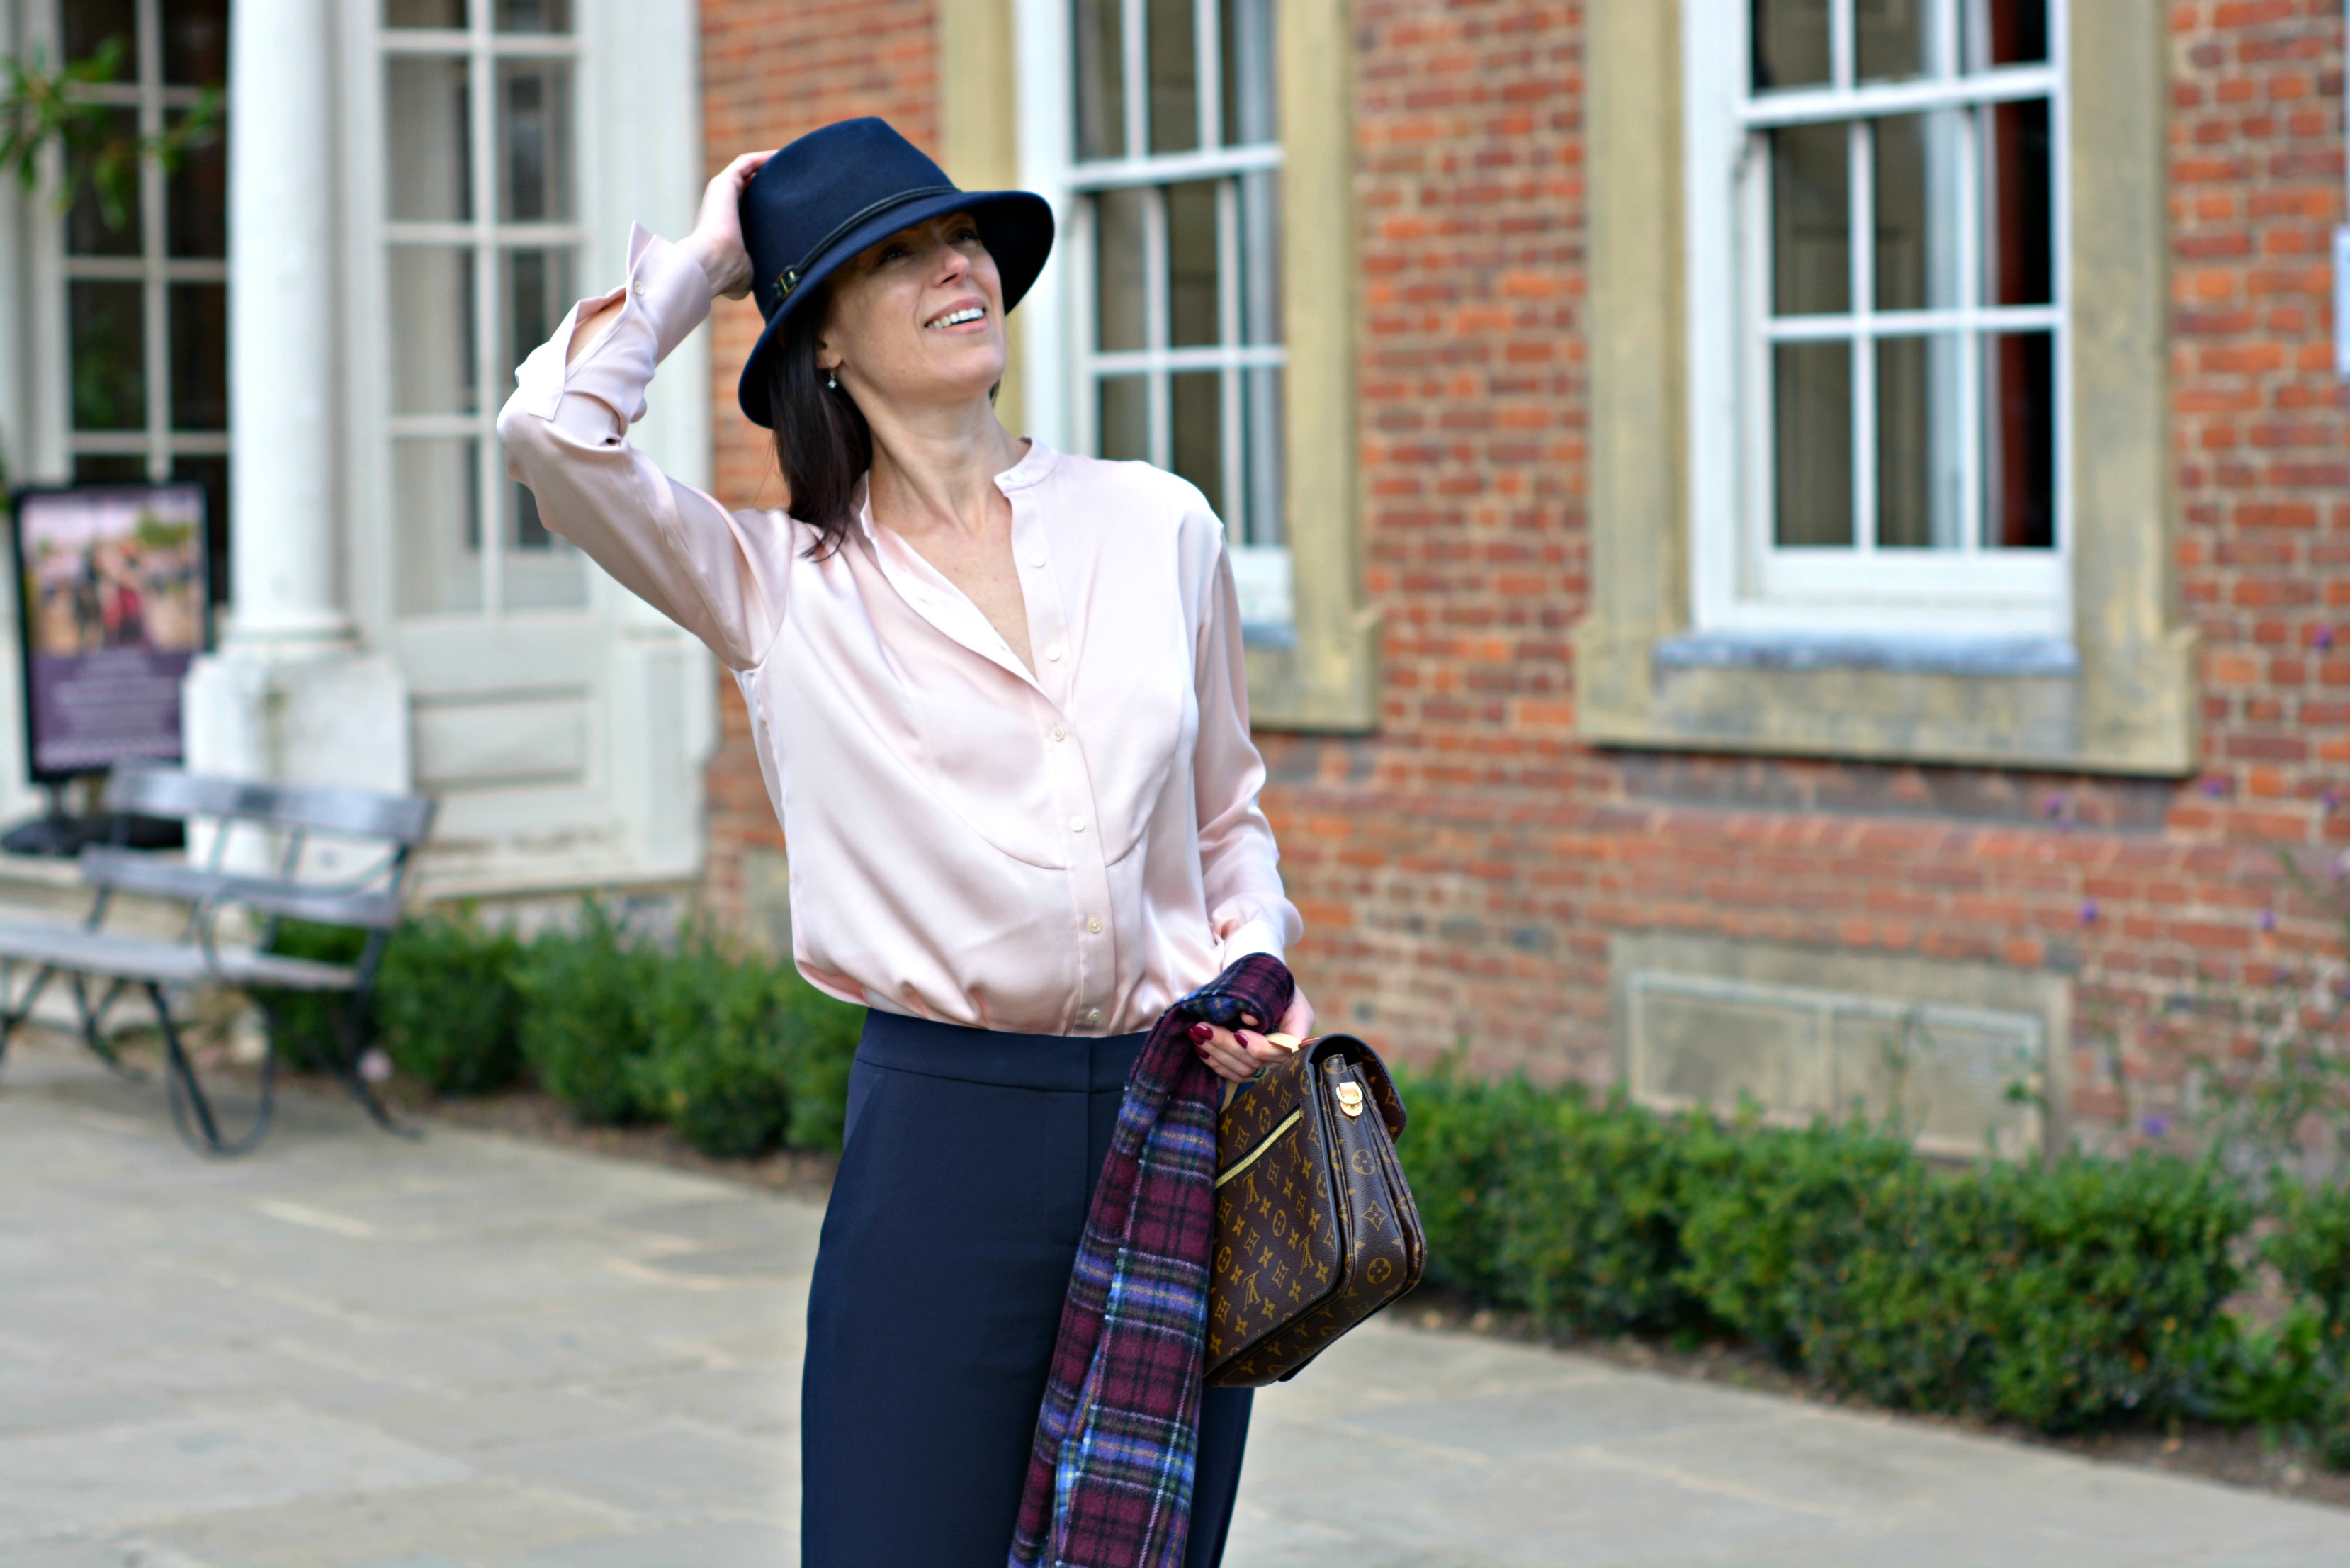 Investment pieces x Winser London - accessorized with Laura Ashley hat, Joules scarf and Louis Vuitton Metis bag